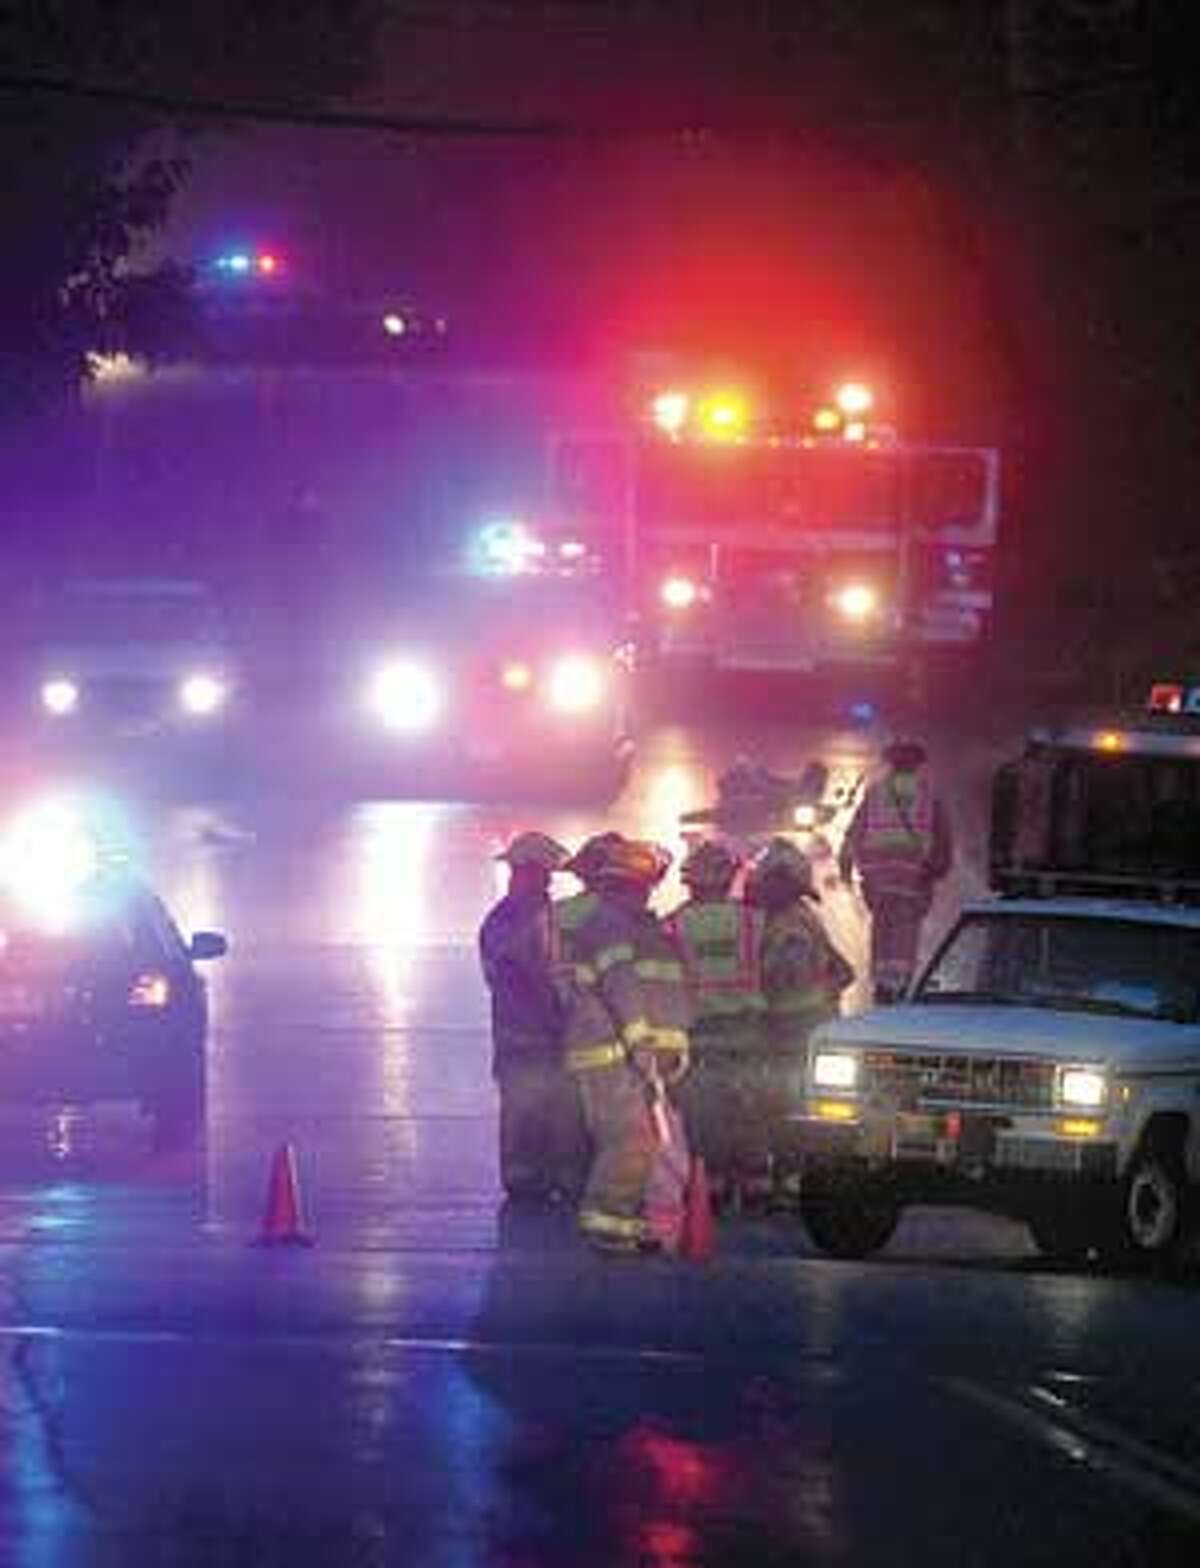 A stretch of Winsted Road in Torrington was closed early Monday evening for an accident investigation.